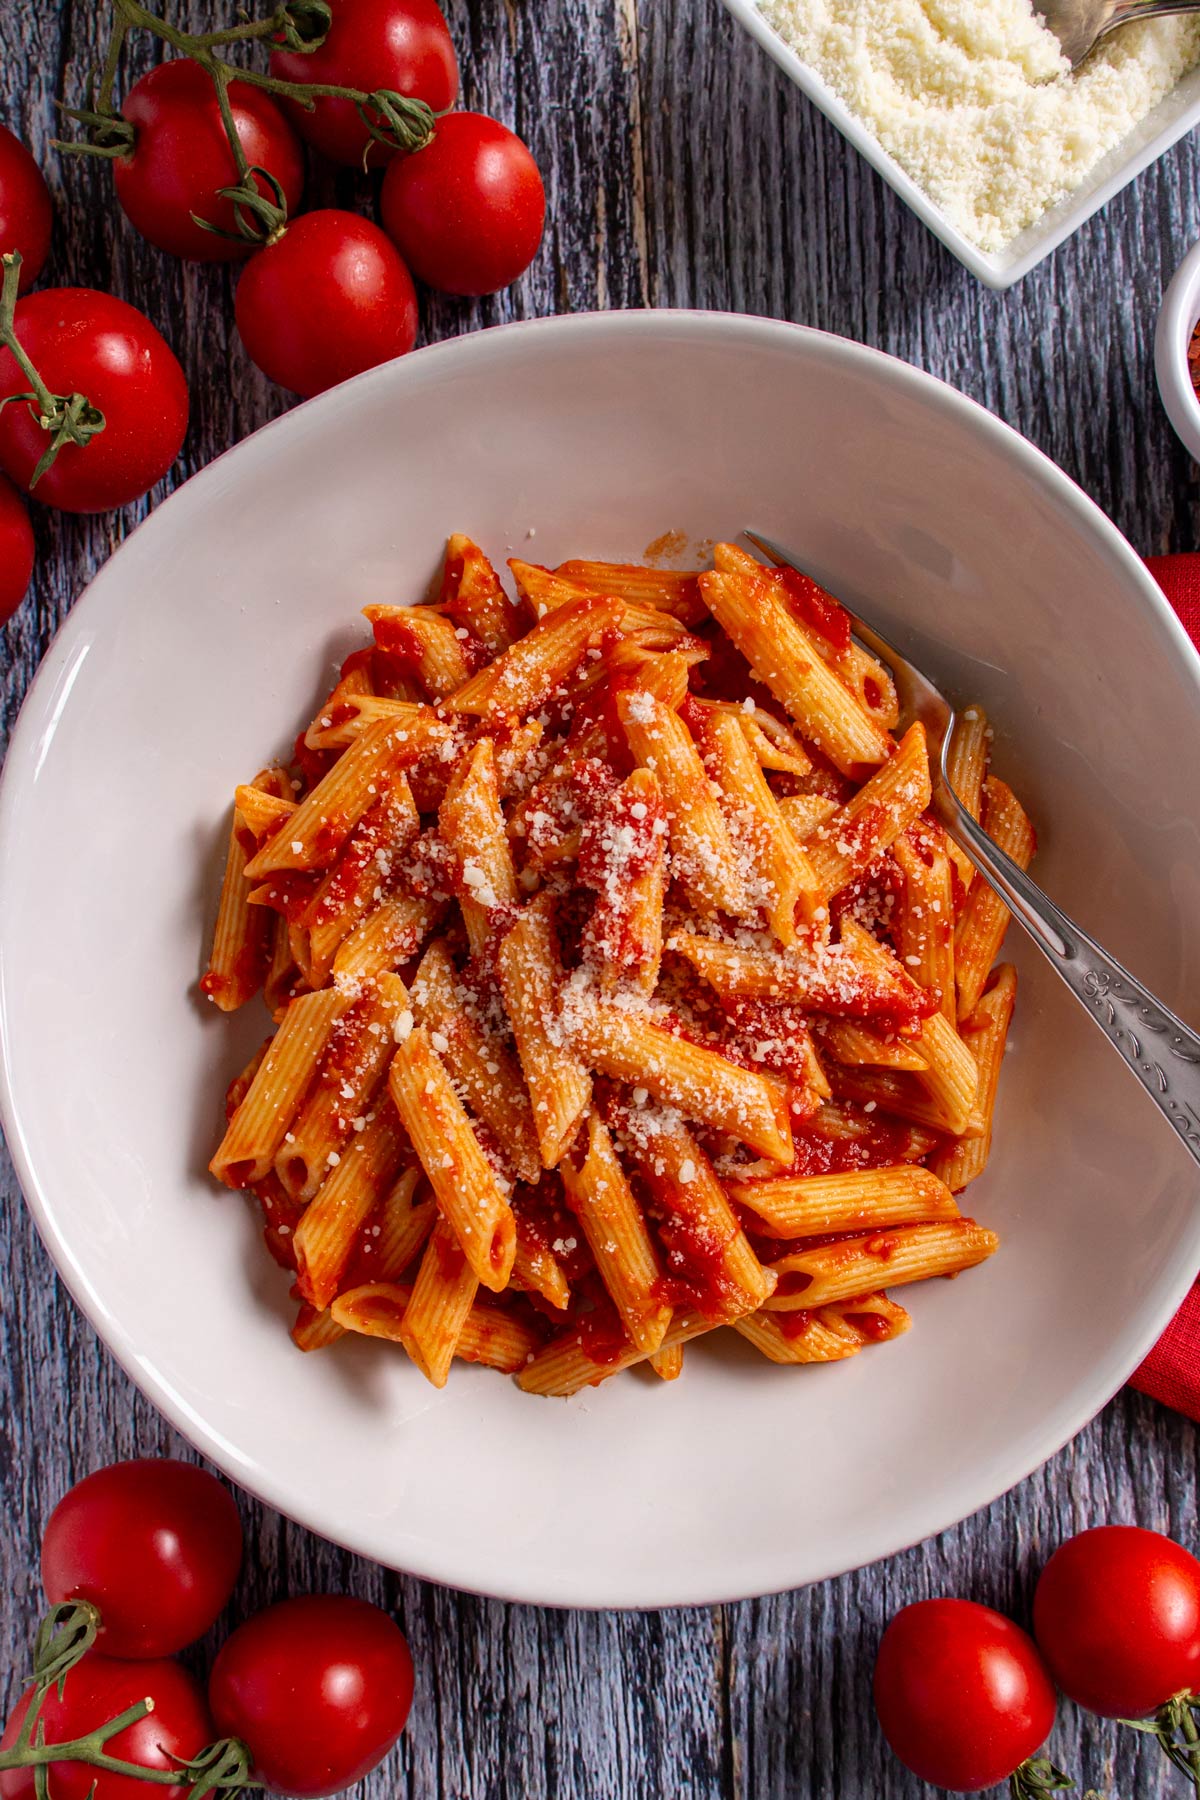 Penne all' arrabbiata topped with cheese in a wide pasta bowl surrounded by small tomatoes.